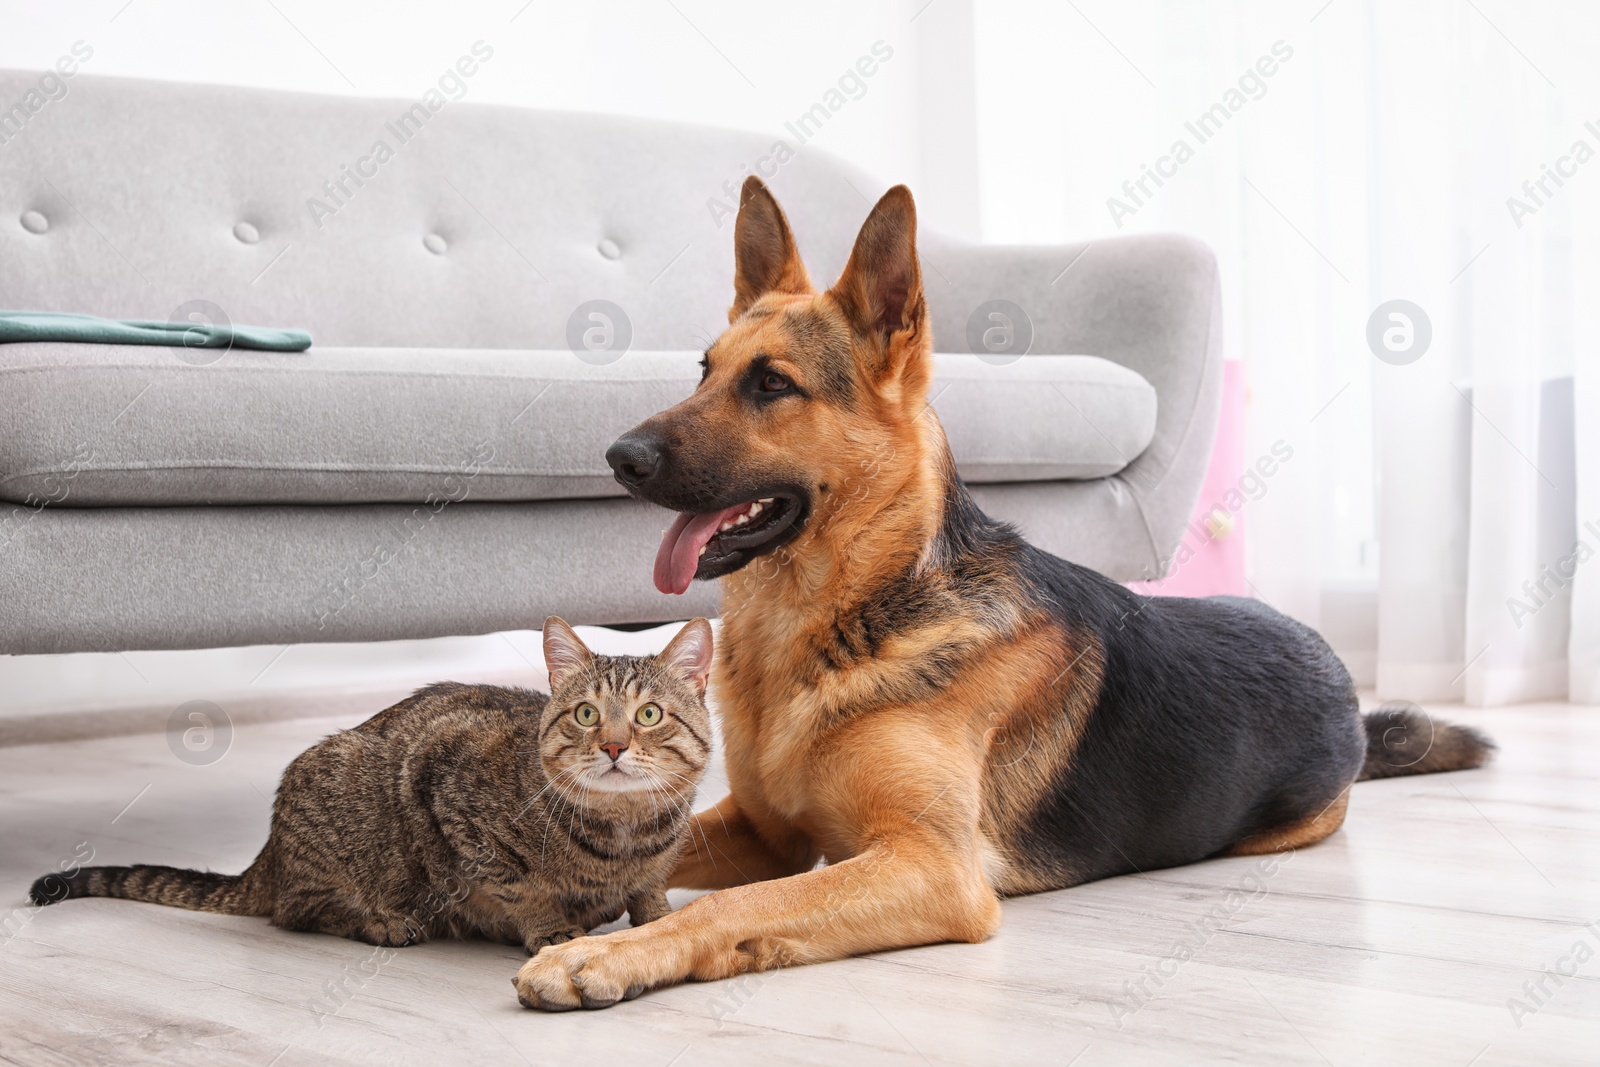 Photo of Adorable cat and dog resting together near sofa indoors. Animal friendship